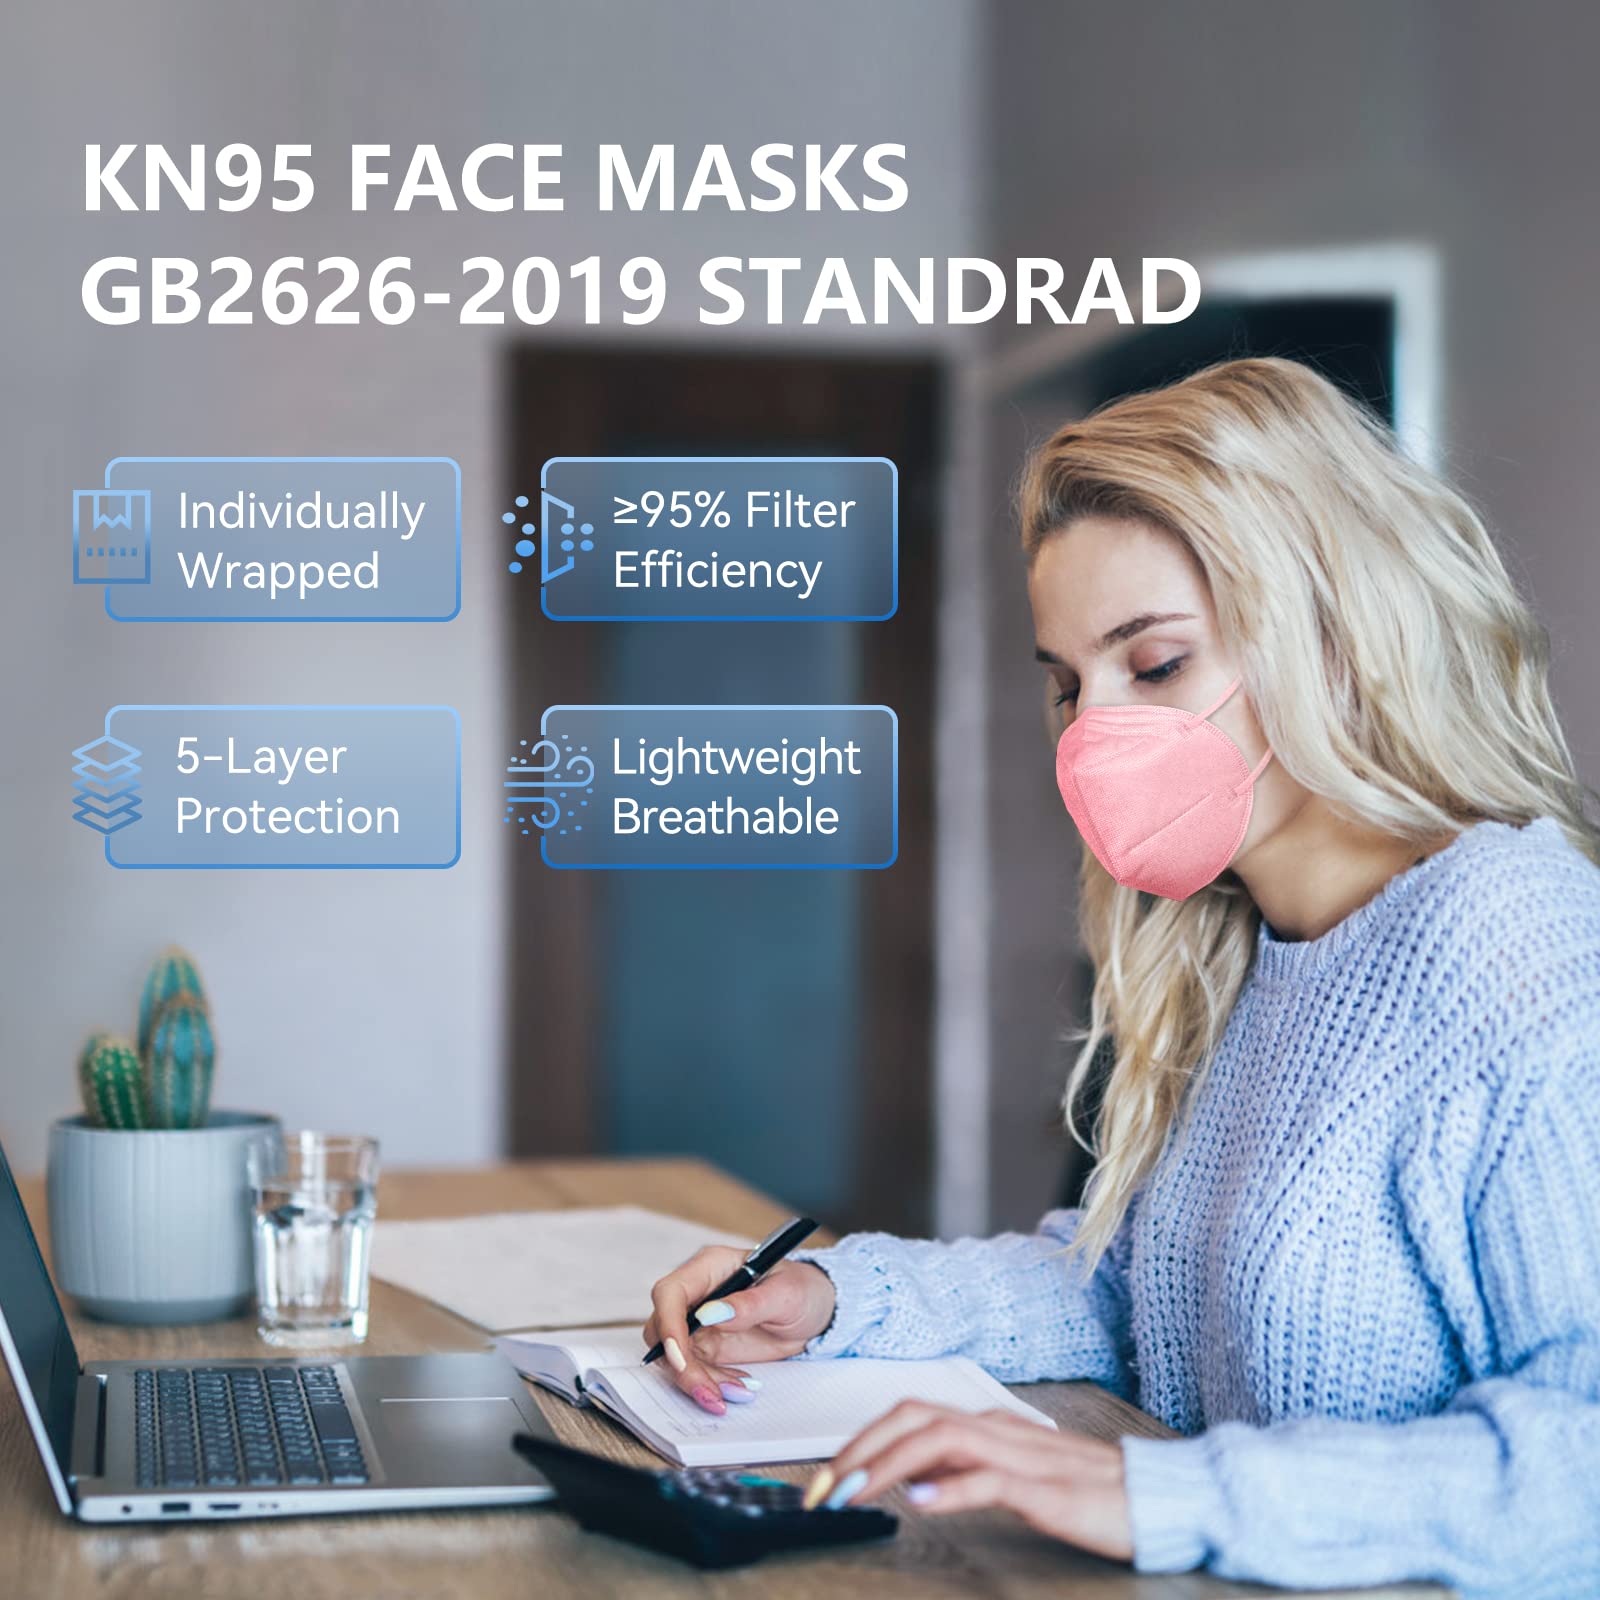 HALIDODO 60 Packs Individually Wrapped KN95 Face Mask 5-Ply Breathable & Comfortable Filter Safety Mask with Elastic Ear loop and Nose Bridge Clip, Protective Face Cover Mask, Multi Color